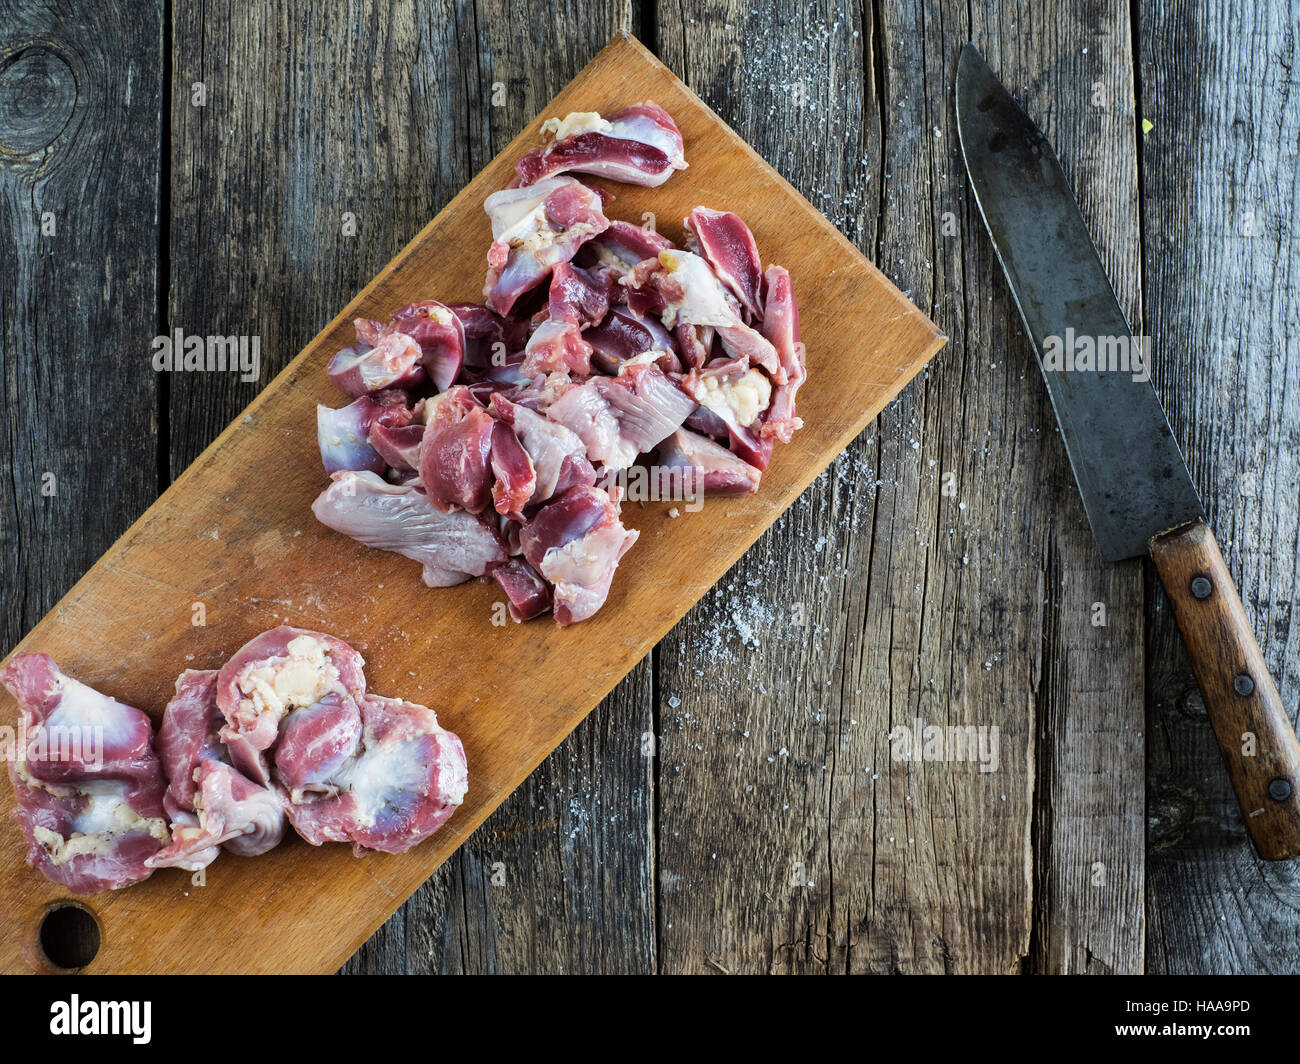 https://c8.alamy.com/comp/HAA9PD/raw-chicken-gizzards-on-cutting-board-on-weathered-old-wooden-table-HAA9PD.jpg